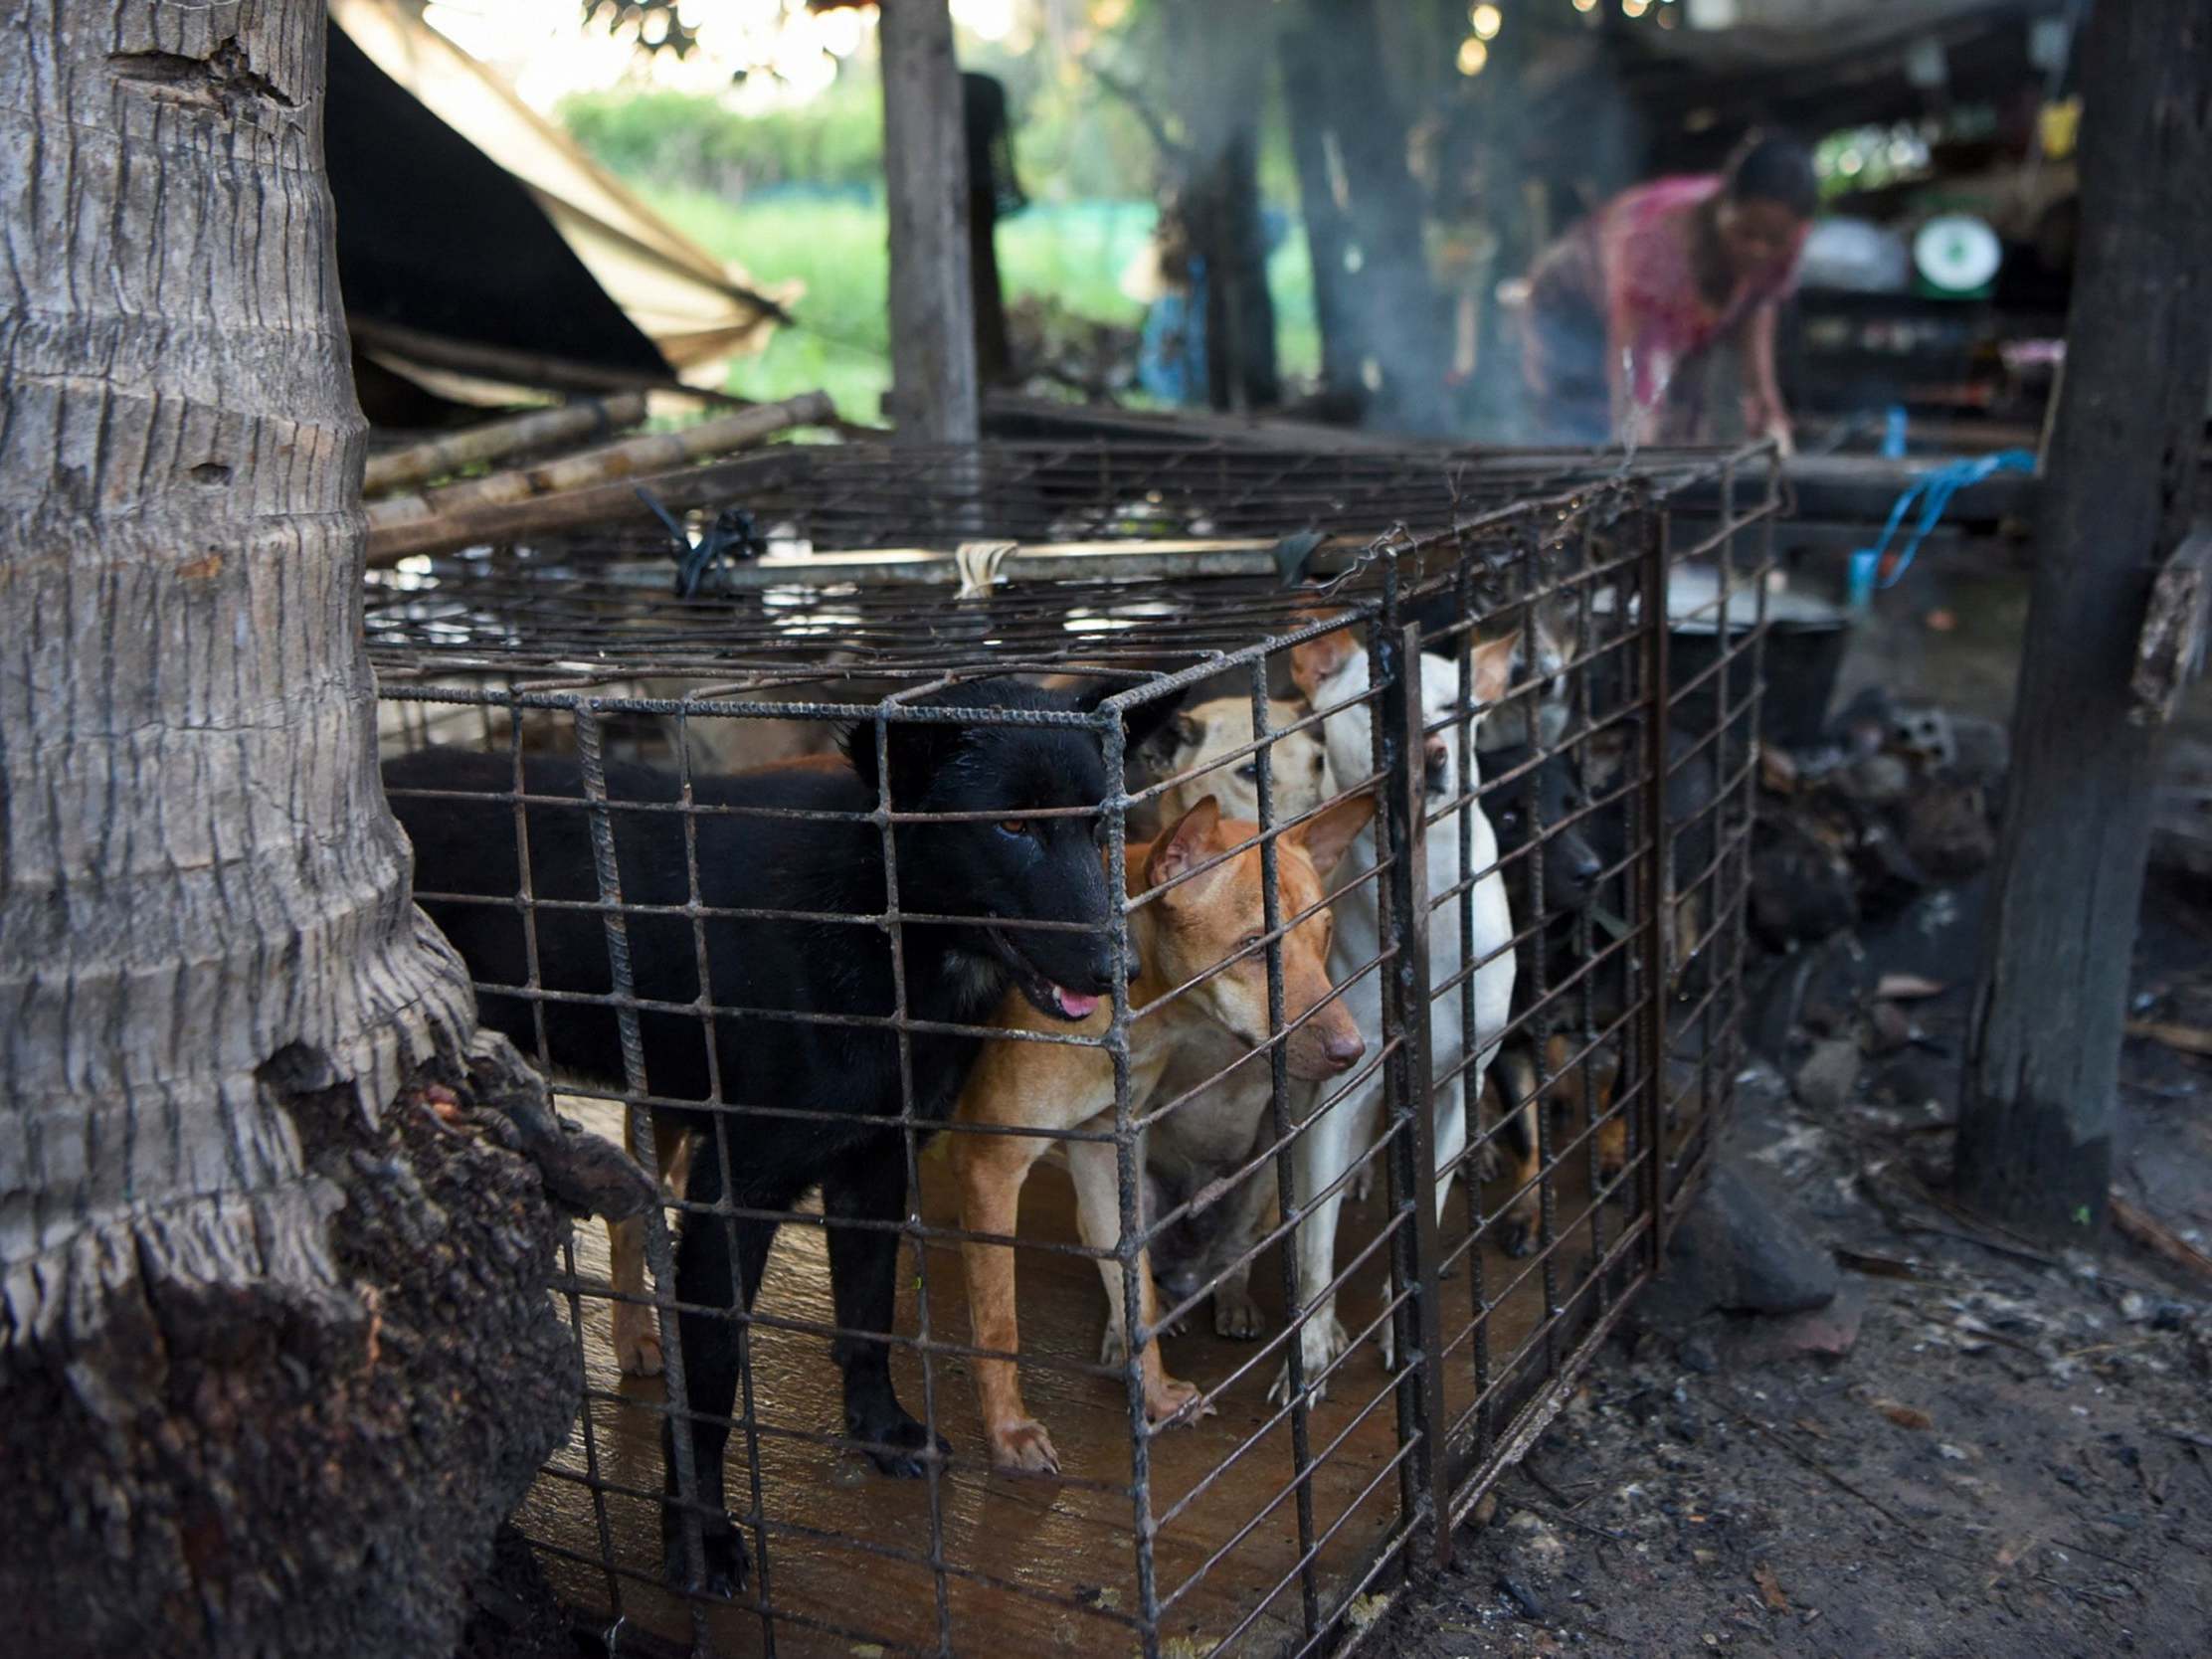 Dogs are kept in a cage as a woman boils water at a slaughterhouse in Siem Reap province